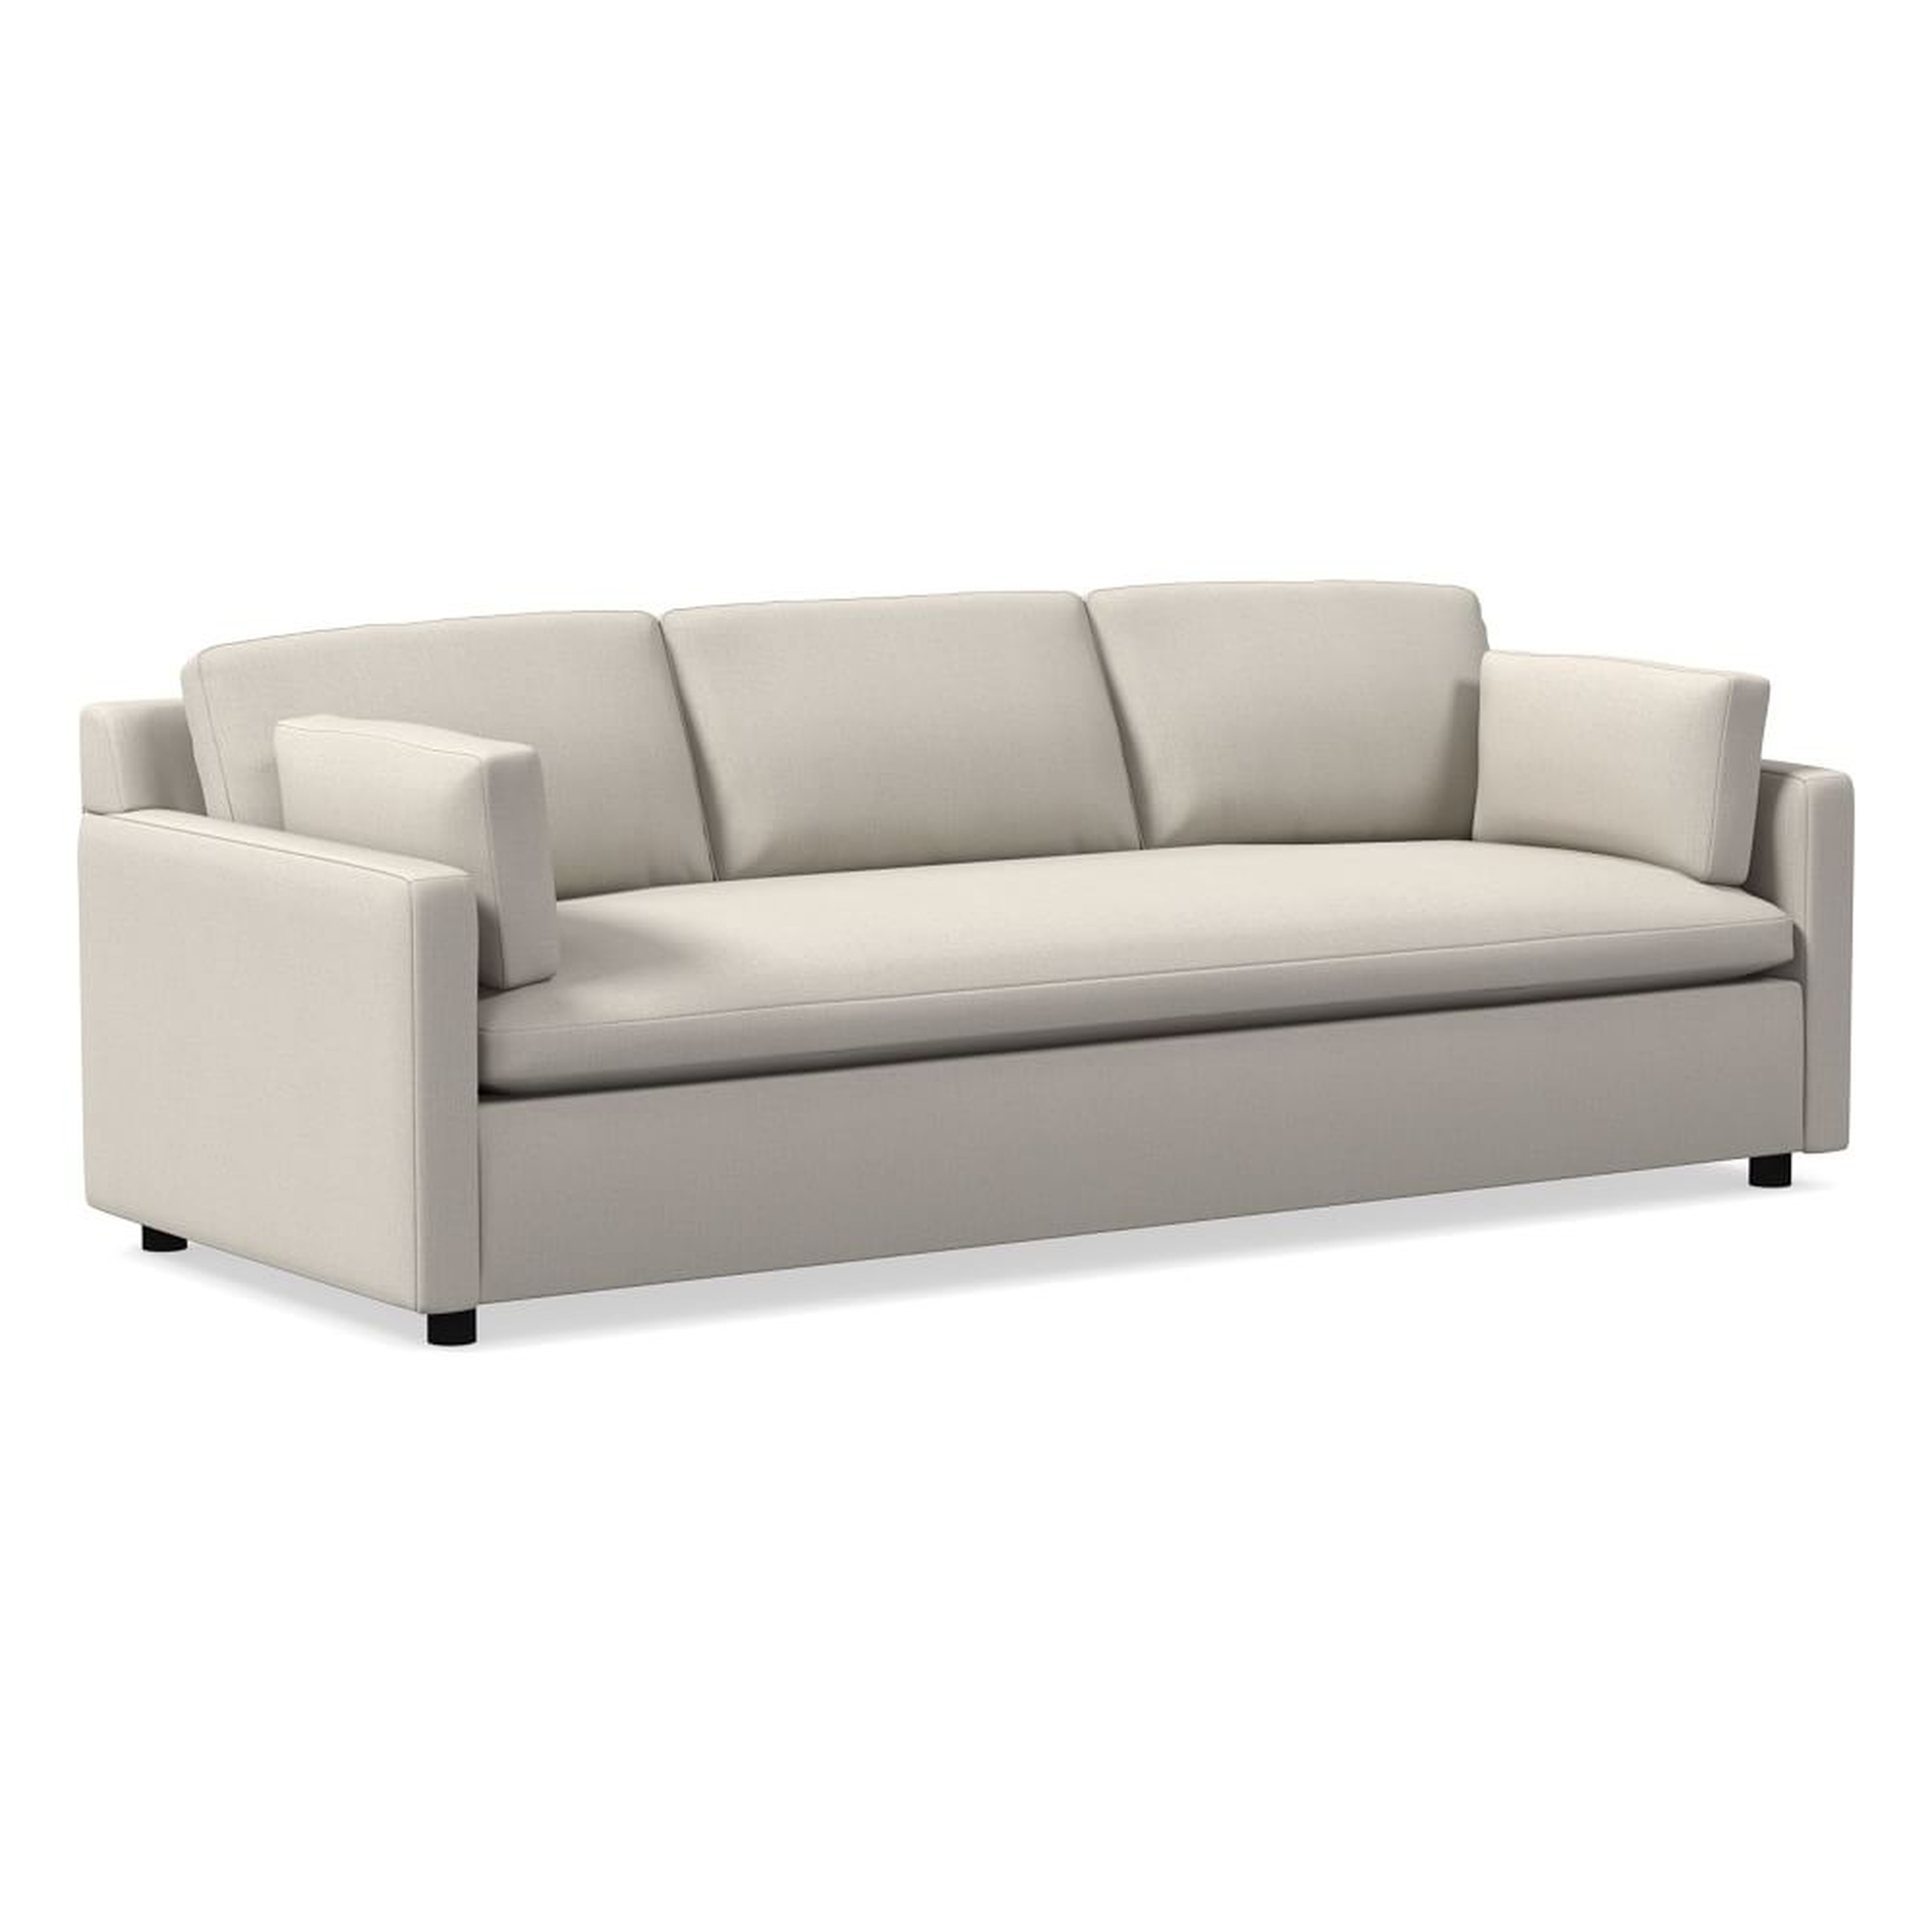 Marin 94" Sofa, Down, Performance Yarn Dyed Linen Weave, Alabaster, Concealed Support - West Elm